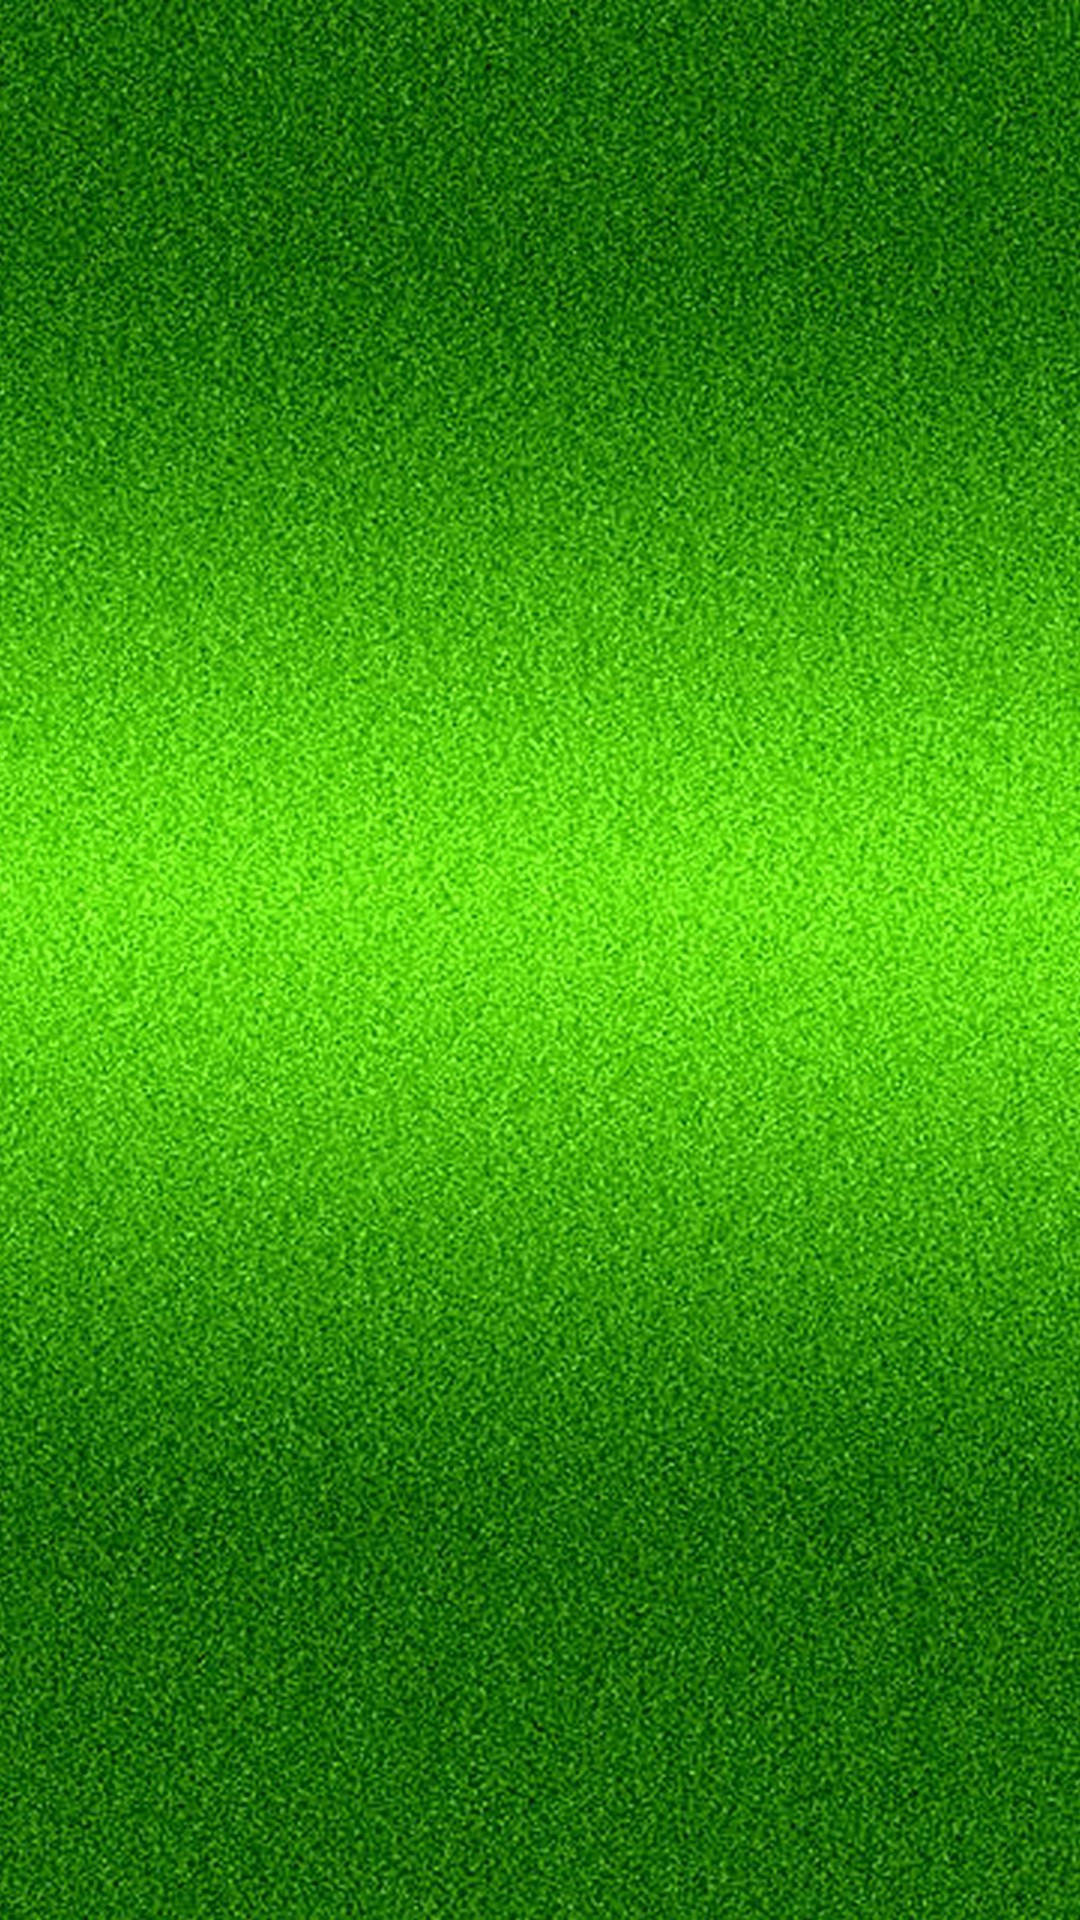 Android Wallpaper HD Green Colour with resolution 1080X1920 pixel. You can make this wallpaper for your Android backgrounds, Tablet, Smartphones Screensavers and Mobile Phone Lock Screen